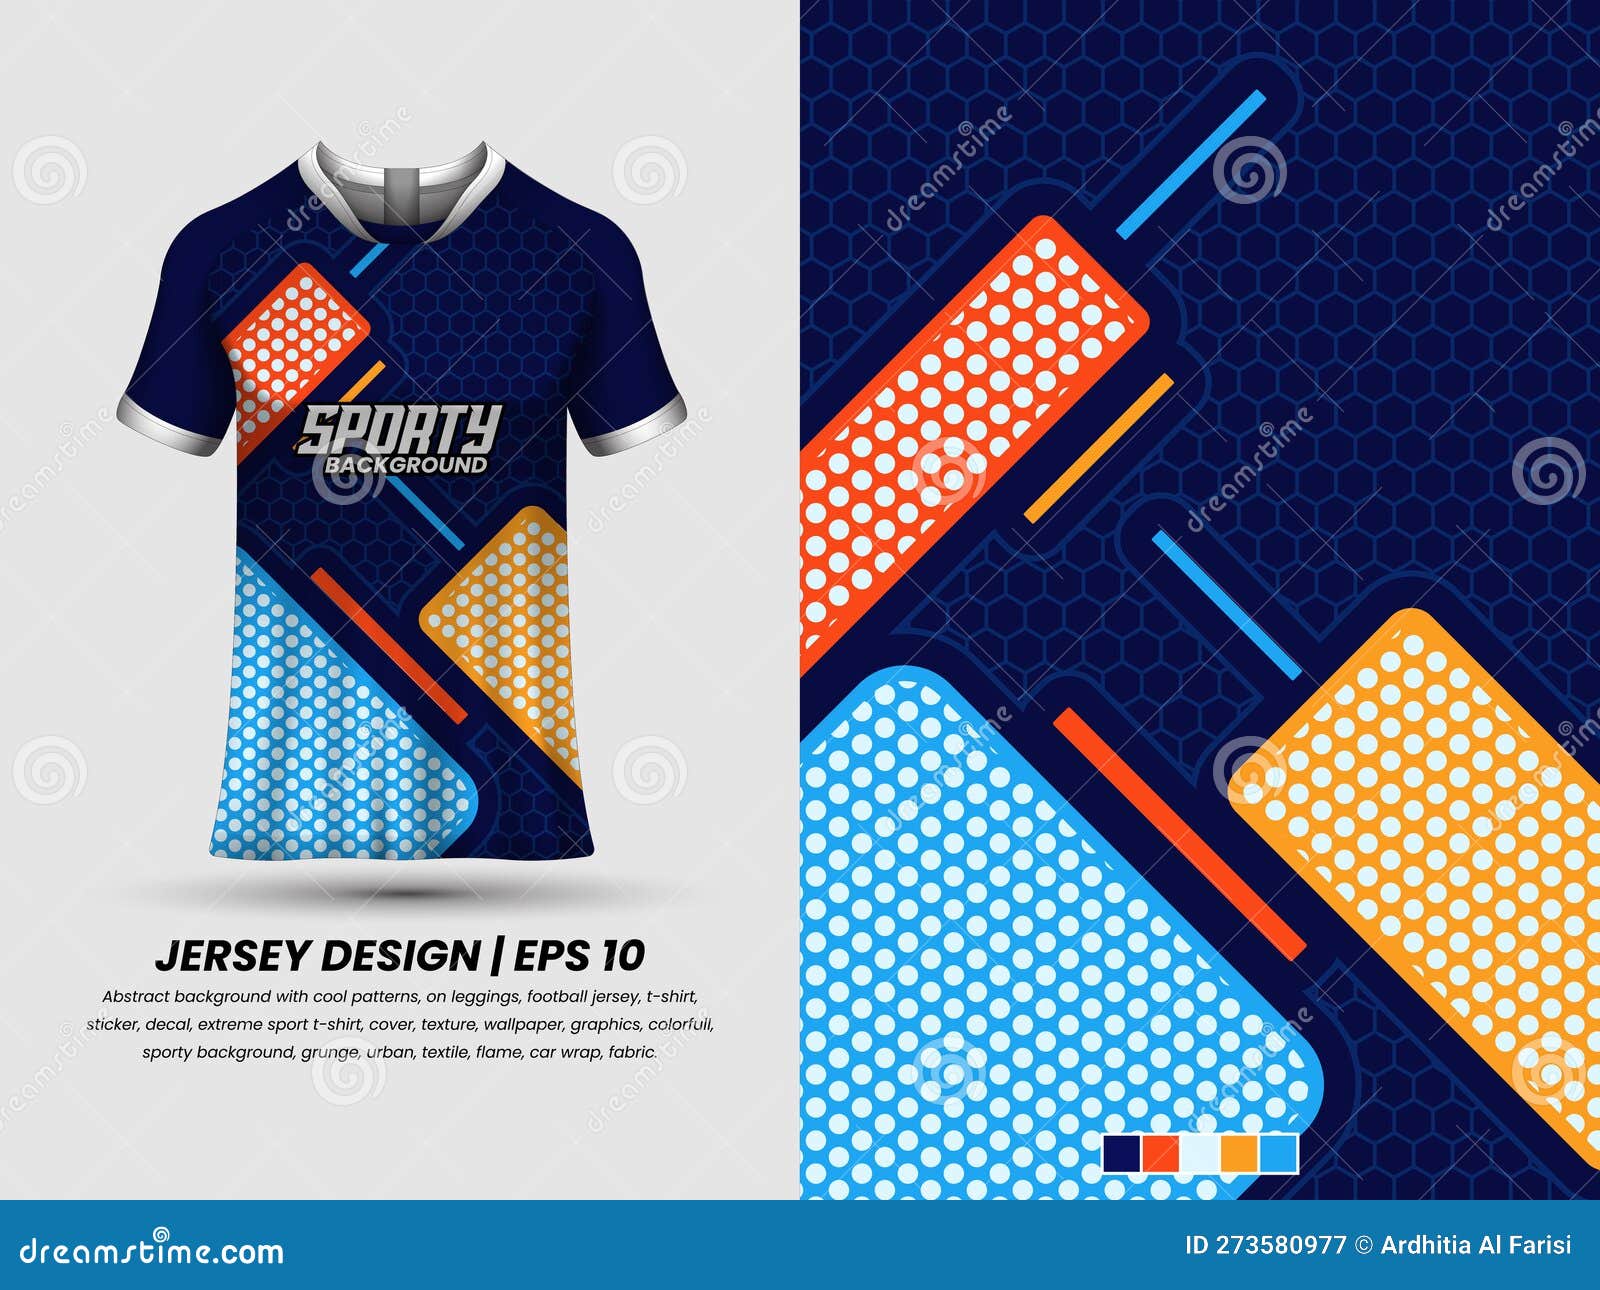 Apllication Pattern To Jersey, Ready To Print, Sublimation Design